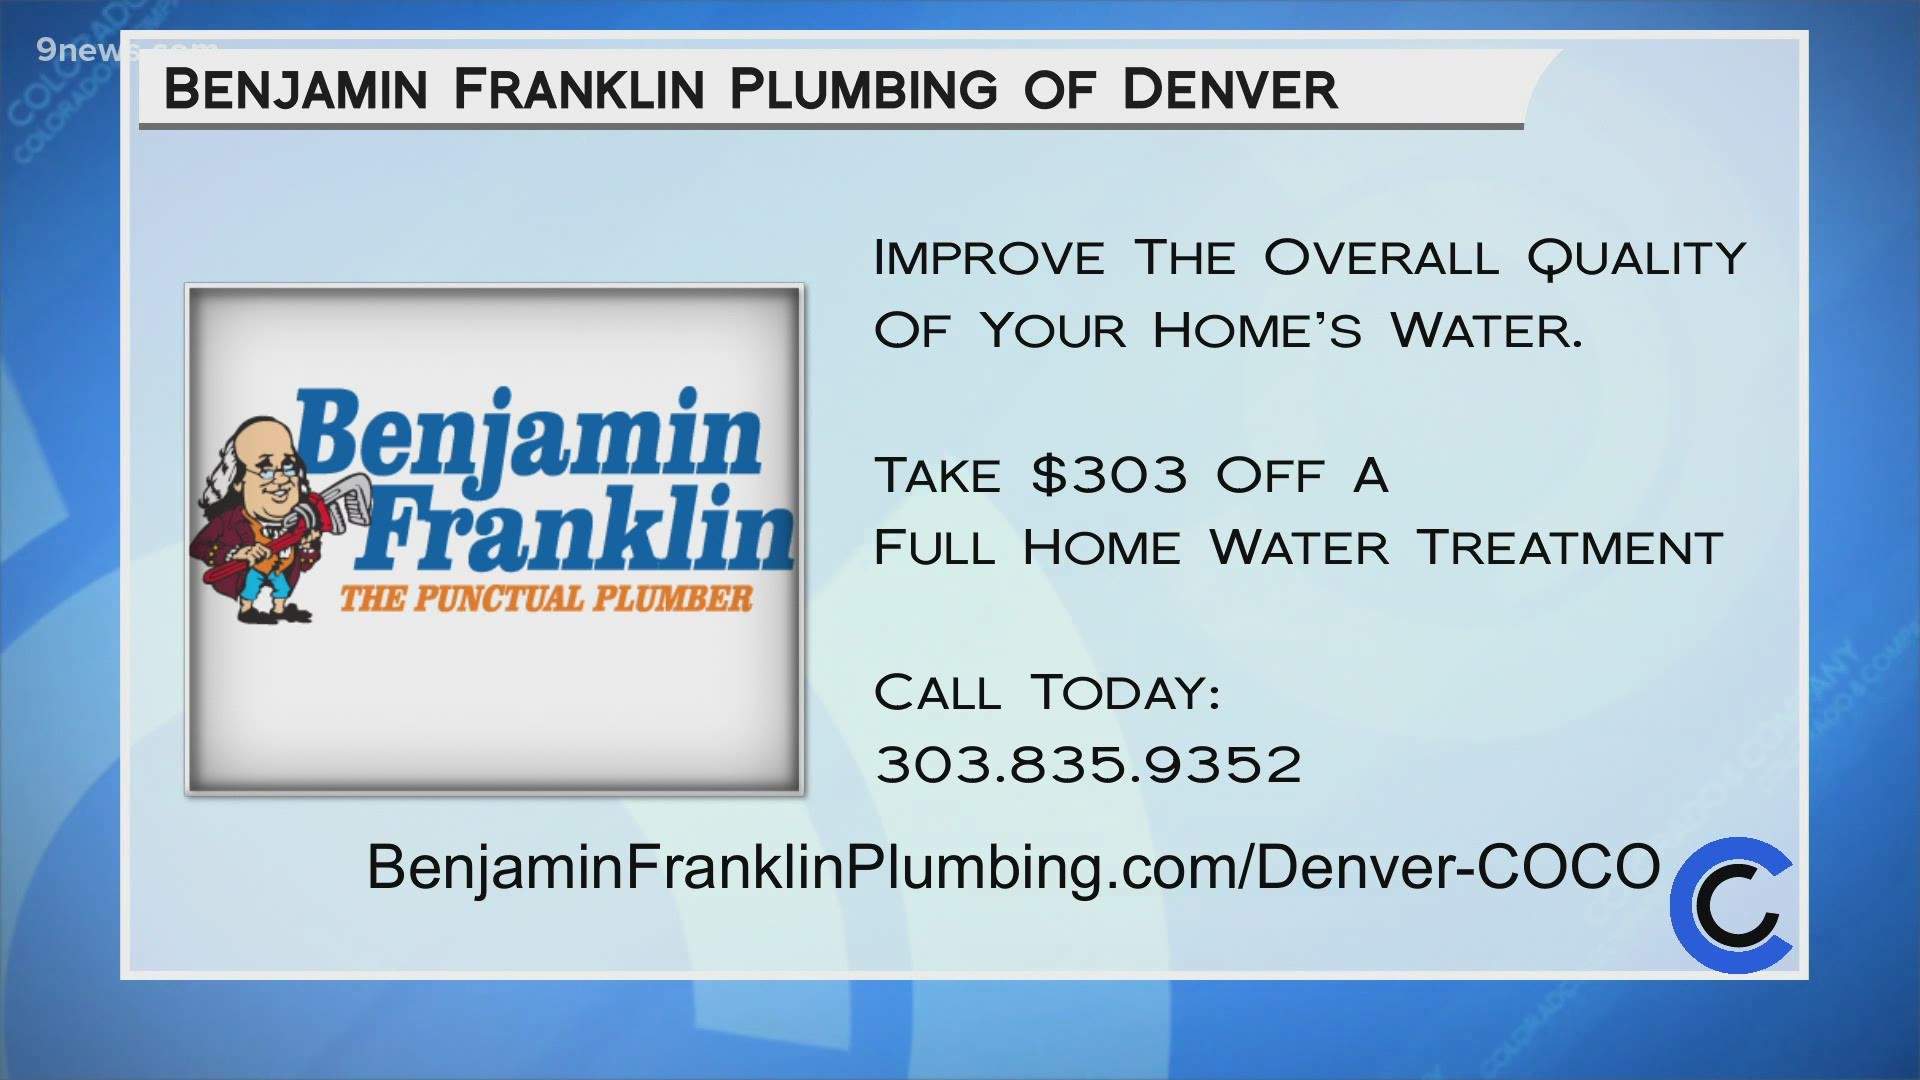 Call the Punctual Plumber! Count on Benjamin Franklin Plumbing to improve the quality of your home's water. Learn more at BenjaminFranklinPlumbing.com/Denver-COCO.